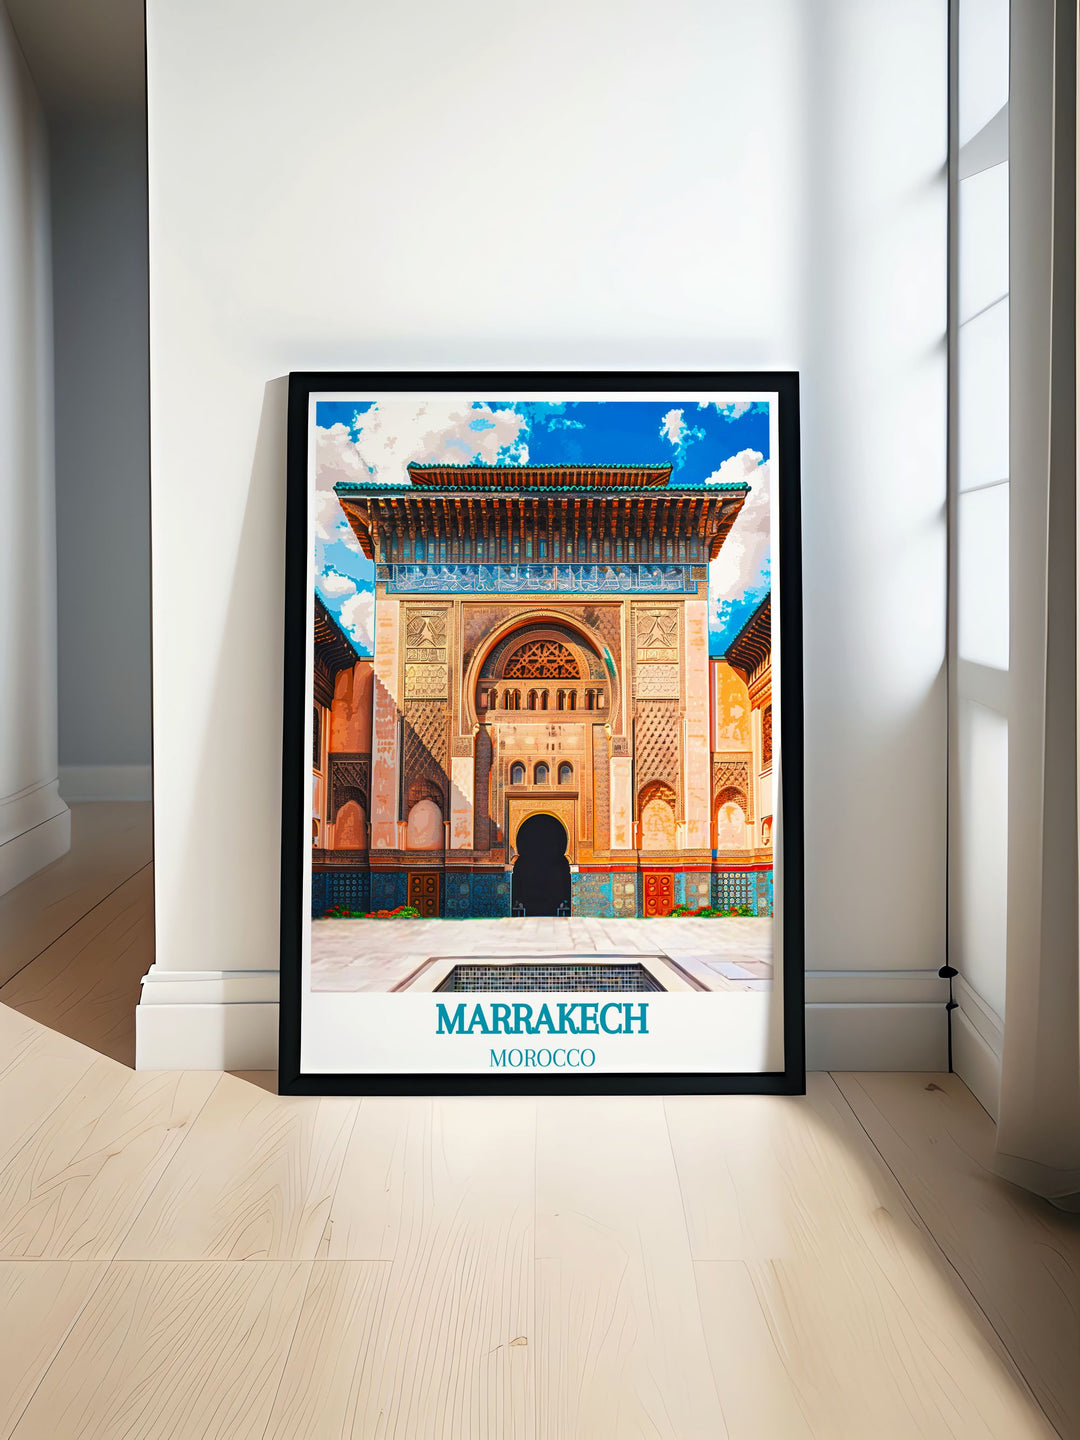 This travel poster of Marrakech captures the citys vibrant energy and historic landmarks, perfect for bringing the colorful charm of Morocco into your home decor.